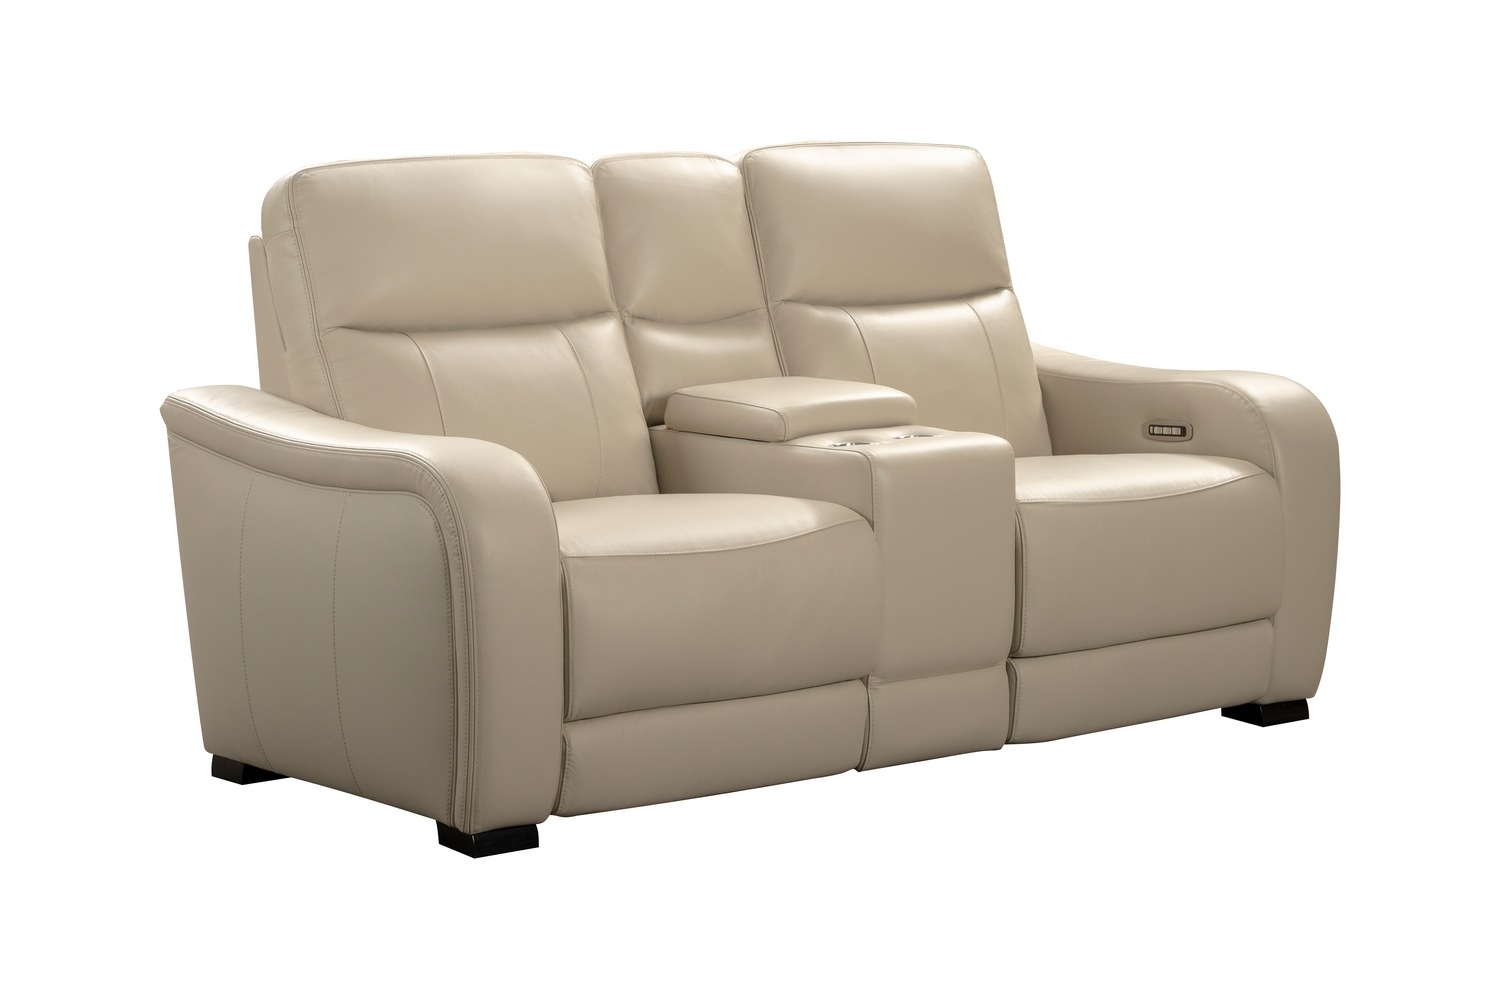 Barcalounger Electra Power Reclining Console Loveseat with Power Head Rests and Power Lumbar - Laurel Cream/Leather Match